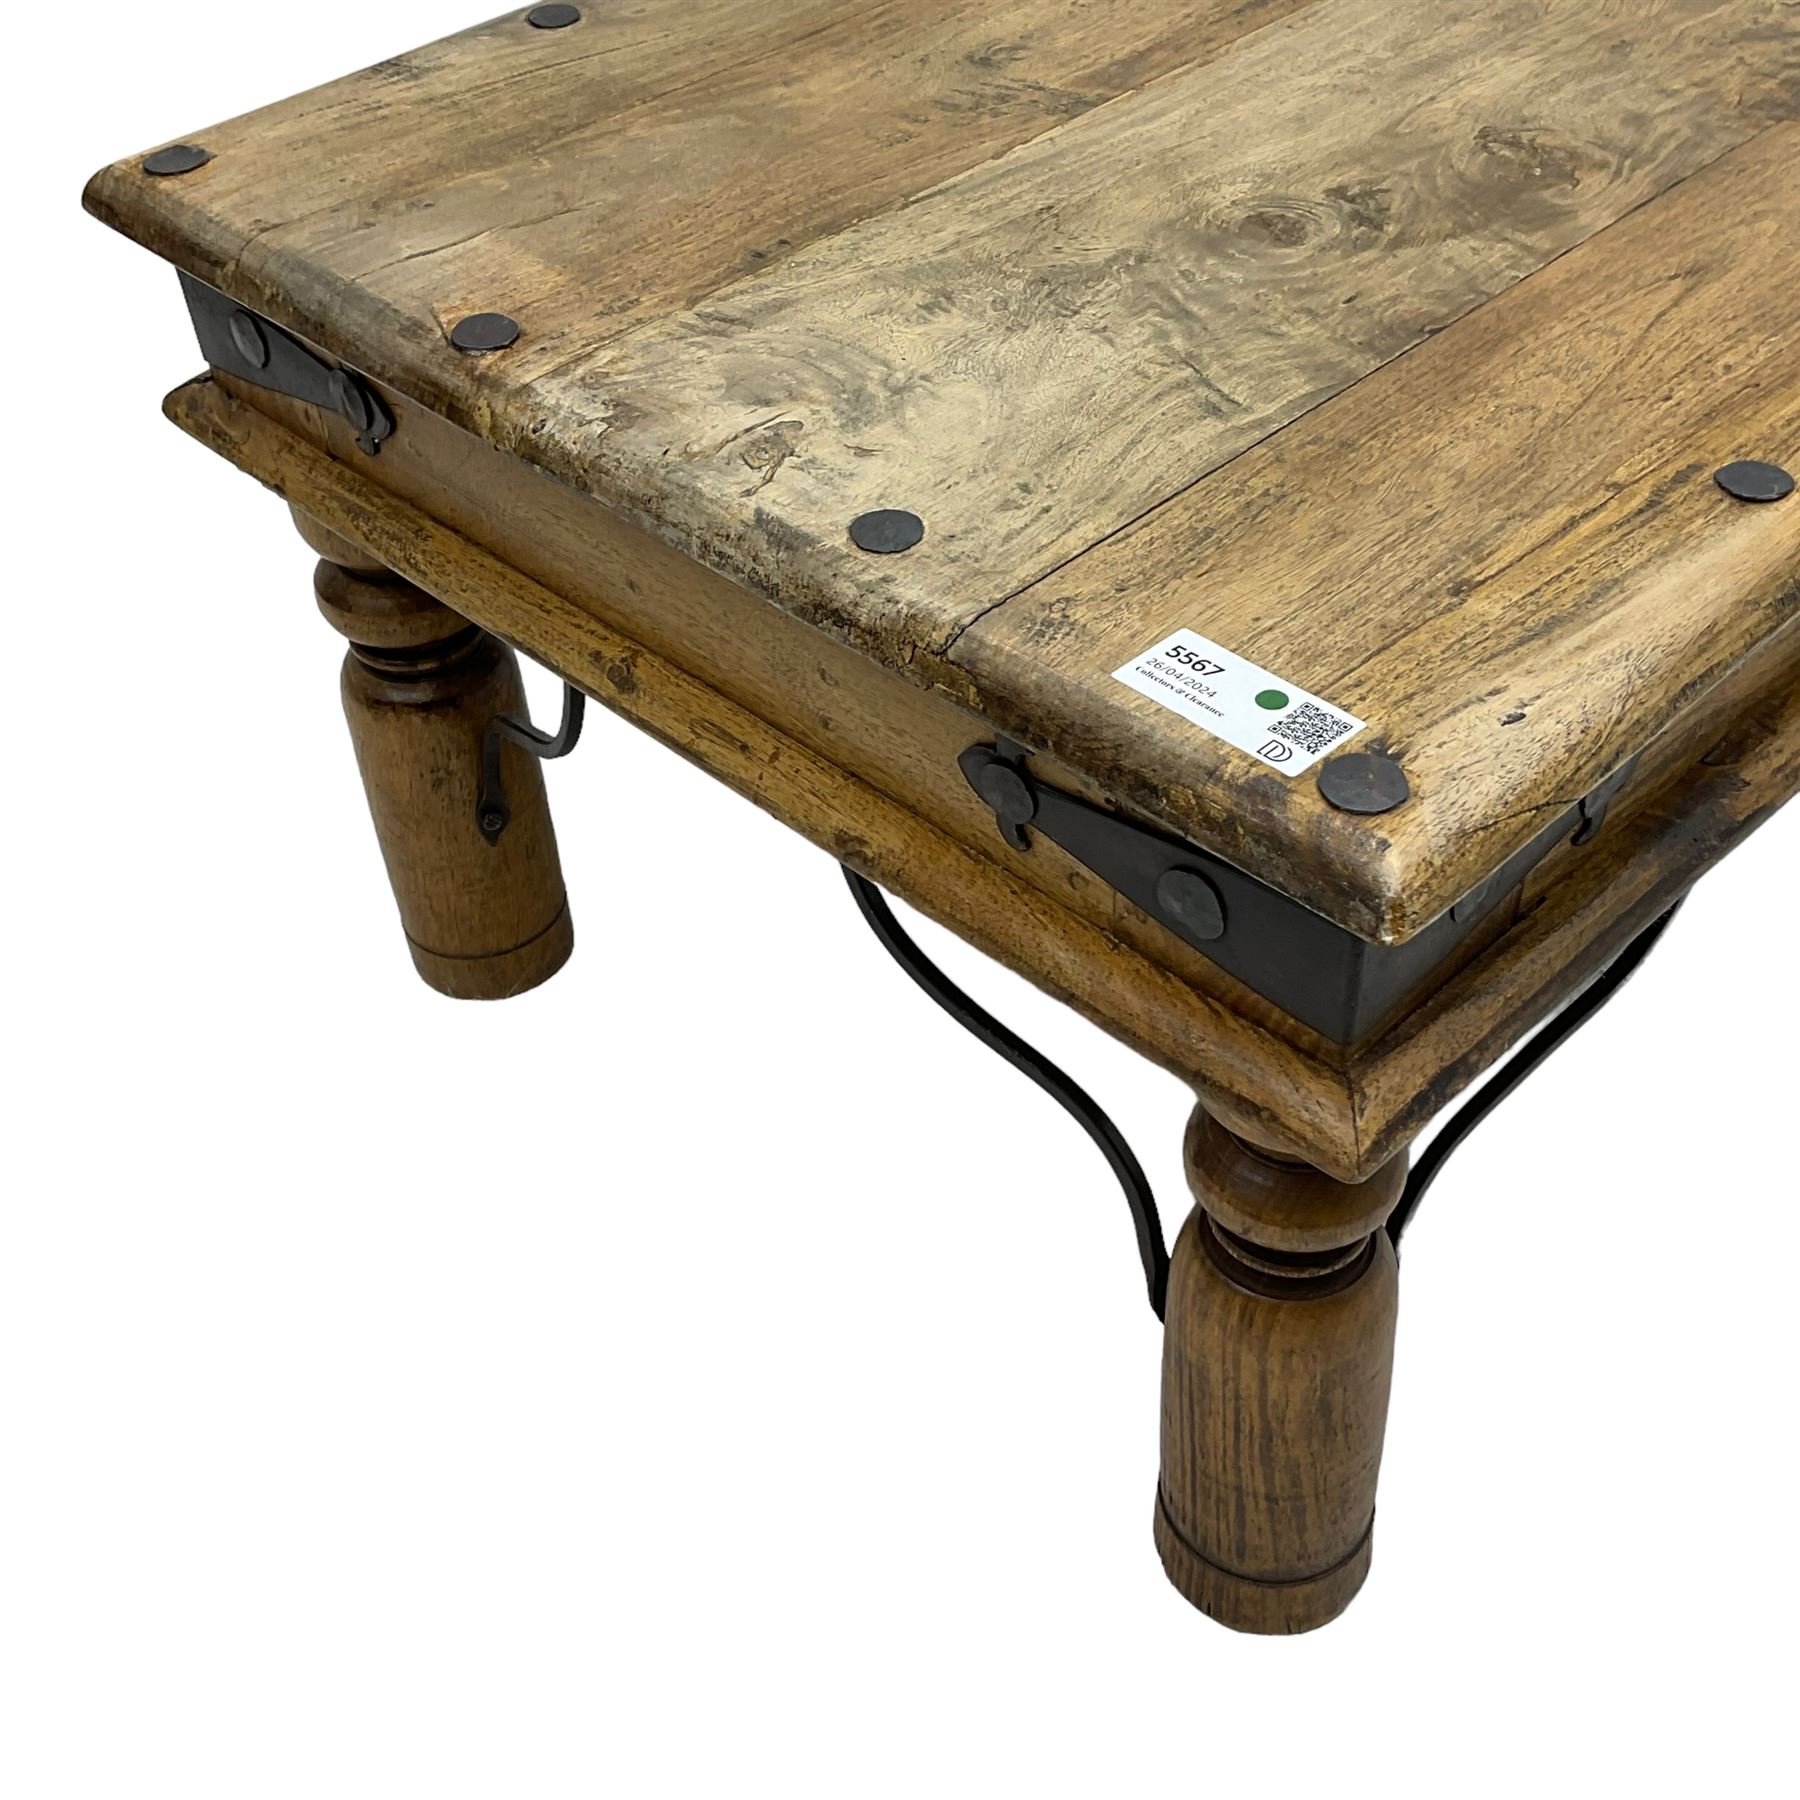 20th century Indian hardwood Thakat occasional table - Image 4 of 4